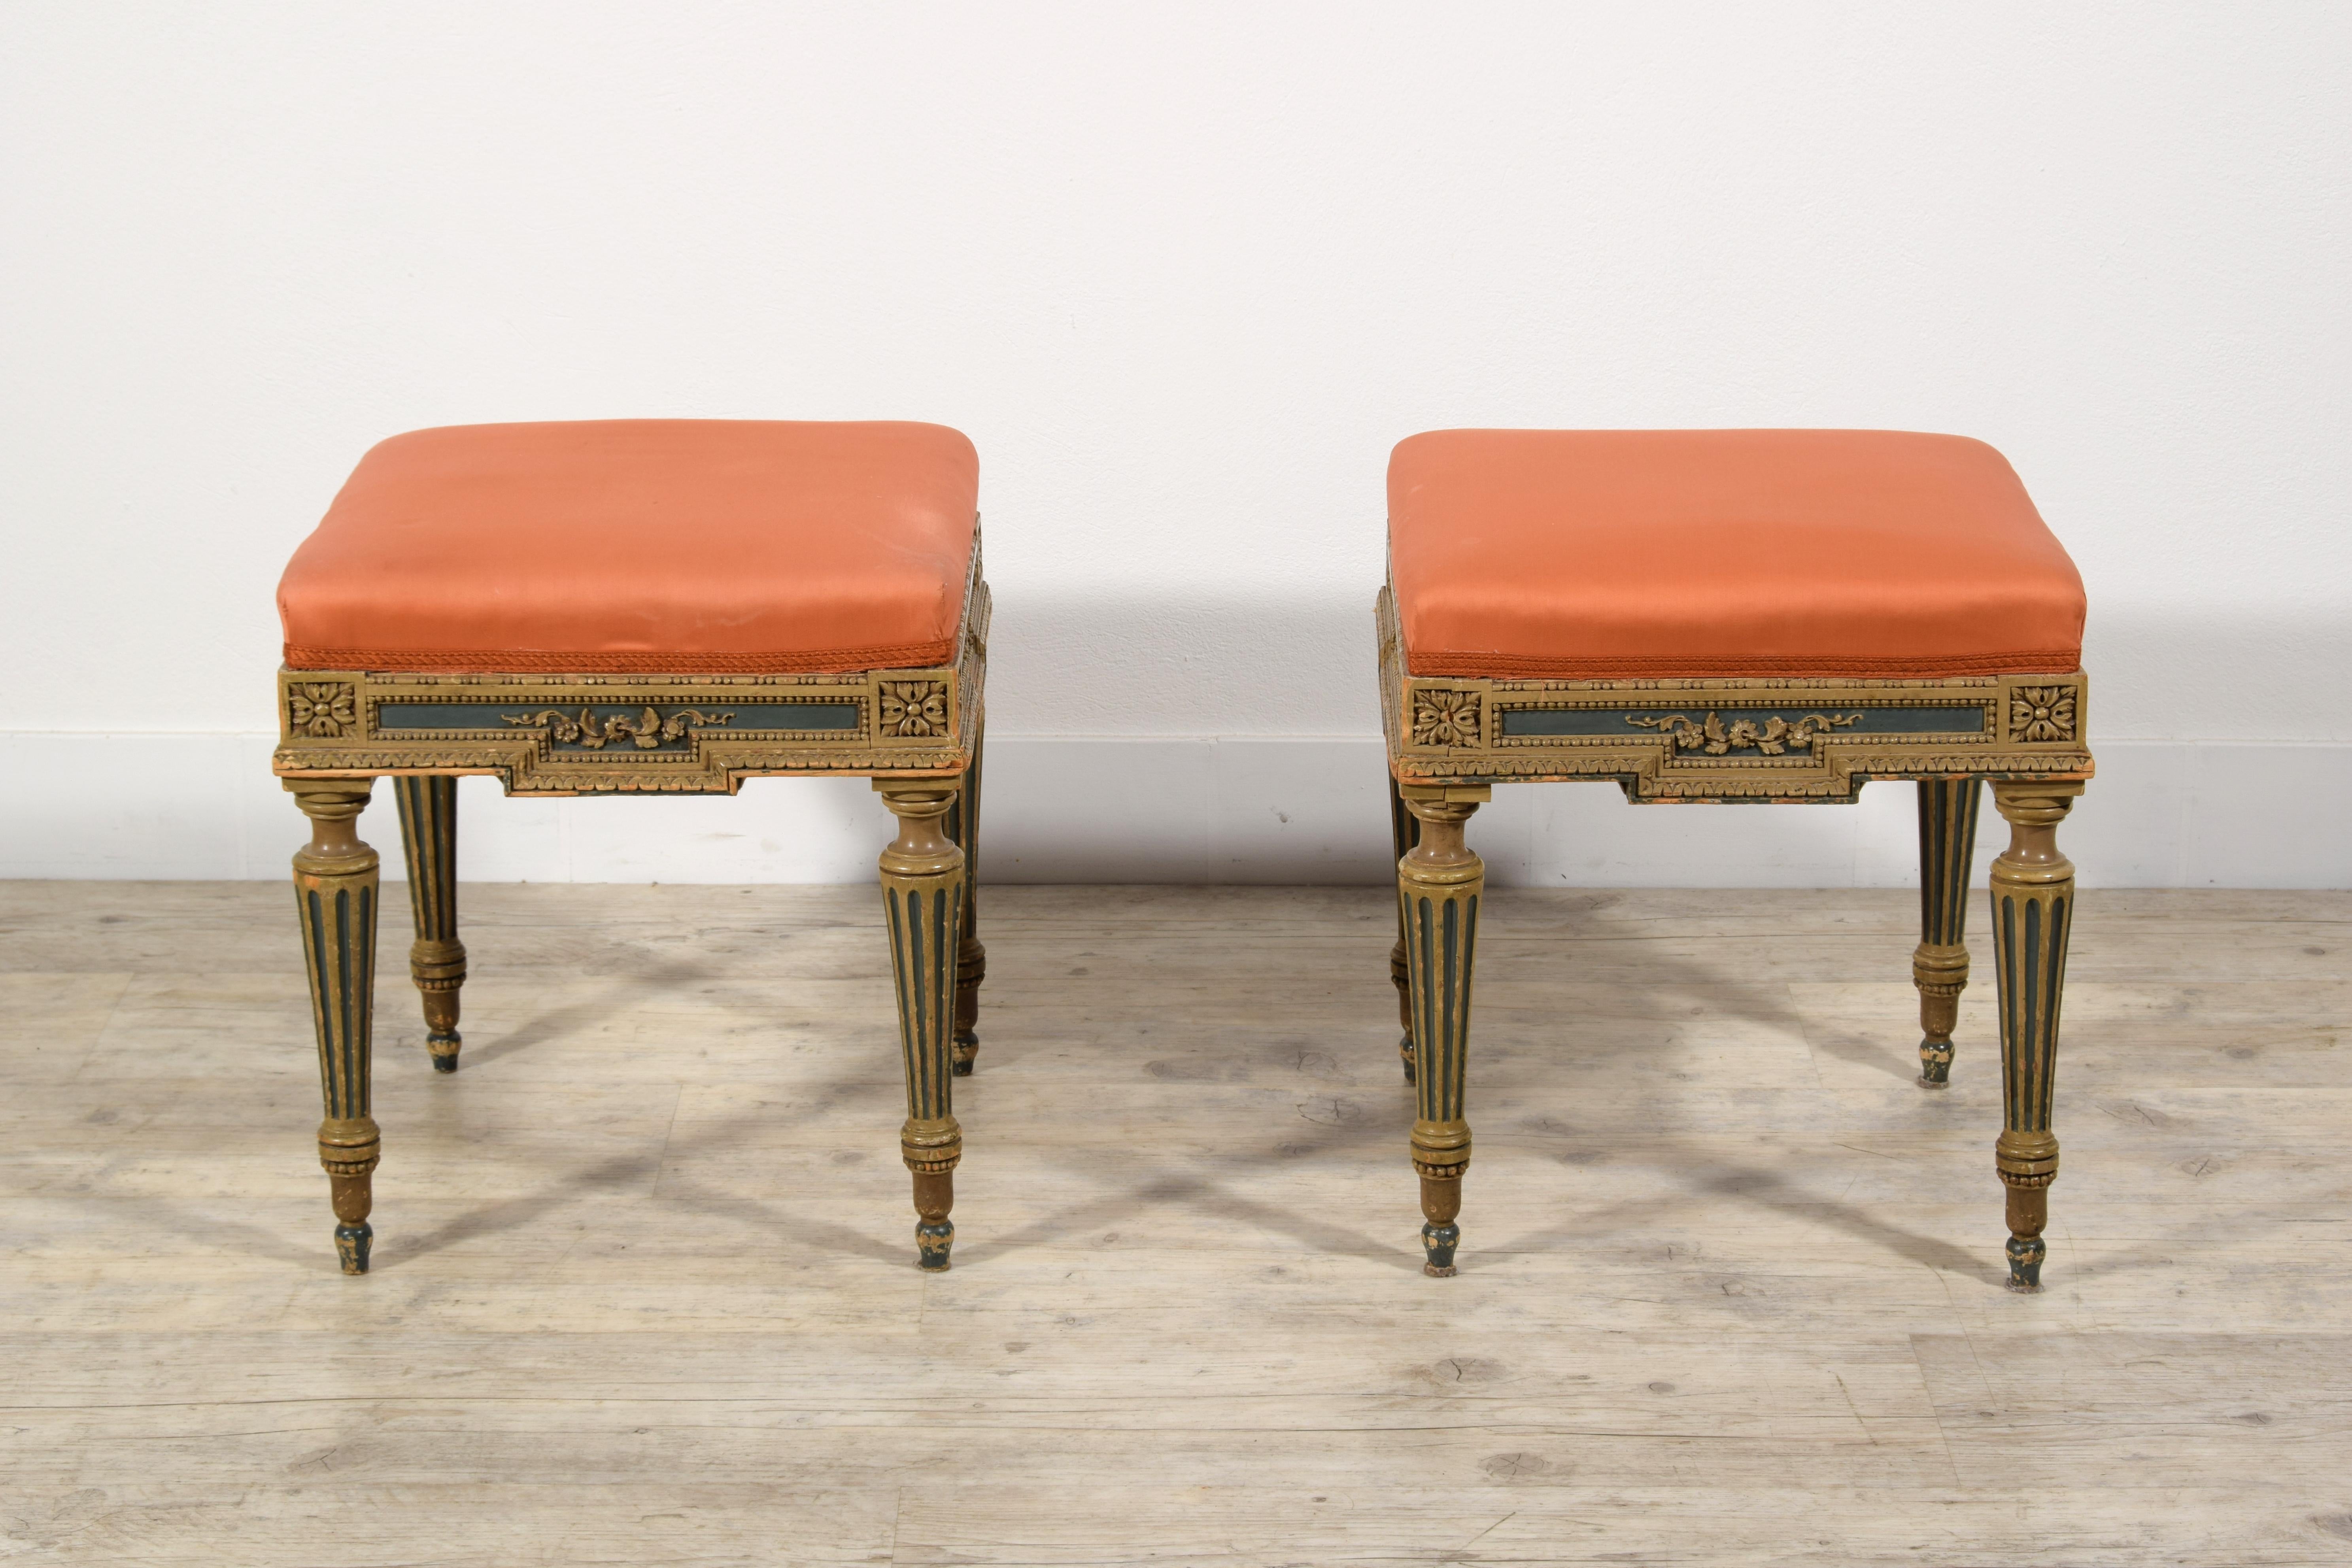 XXth Century, Pair of Italian Neoclassical Style Lacquered Wood Stools For Sale 3